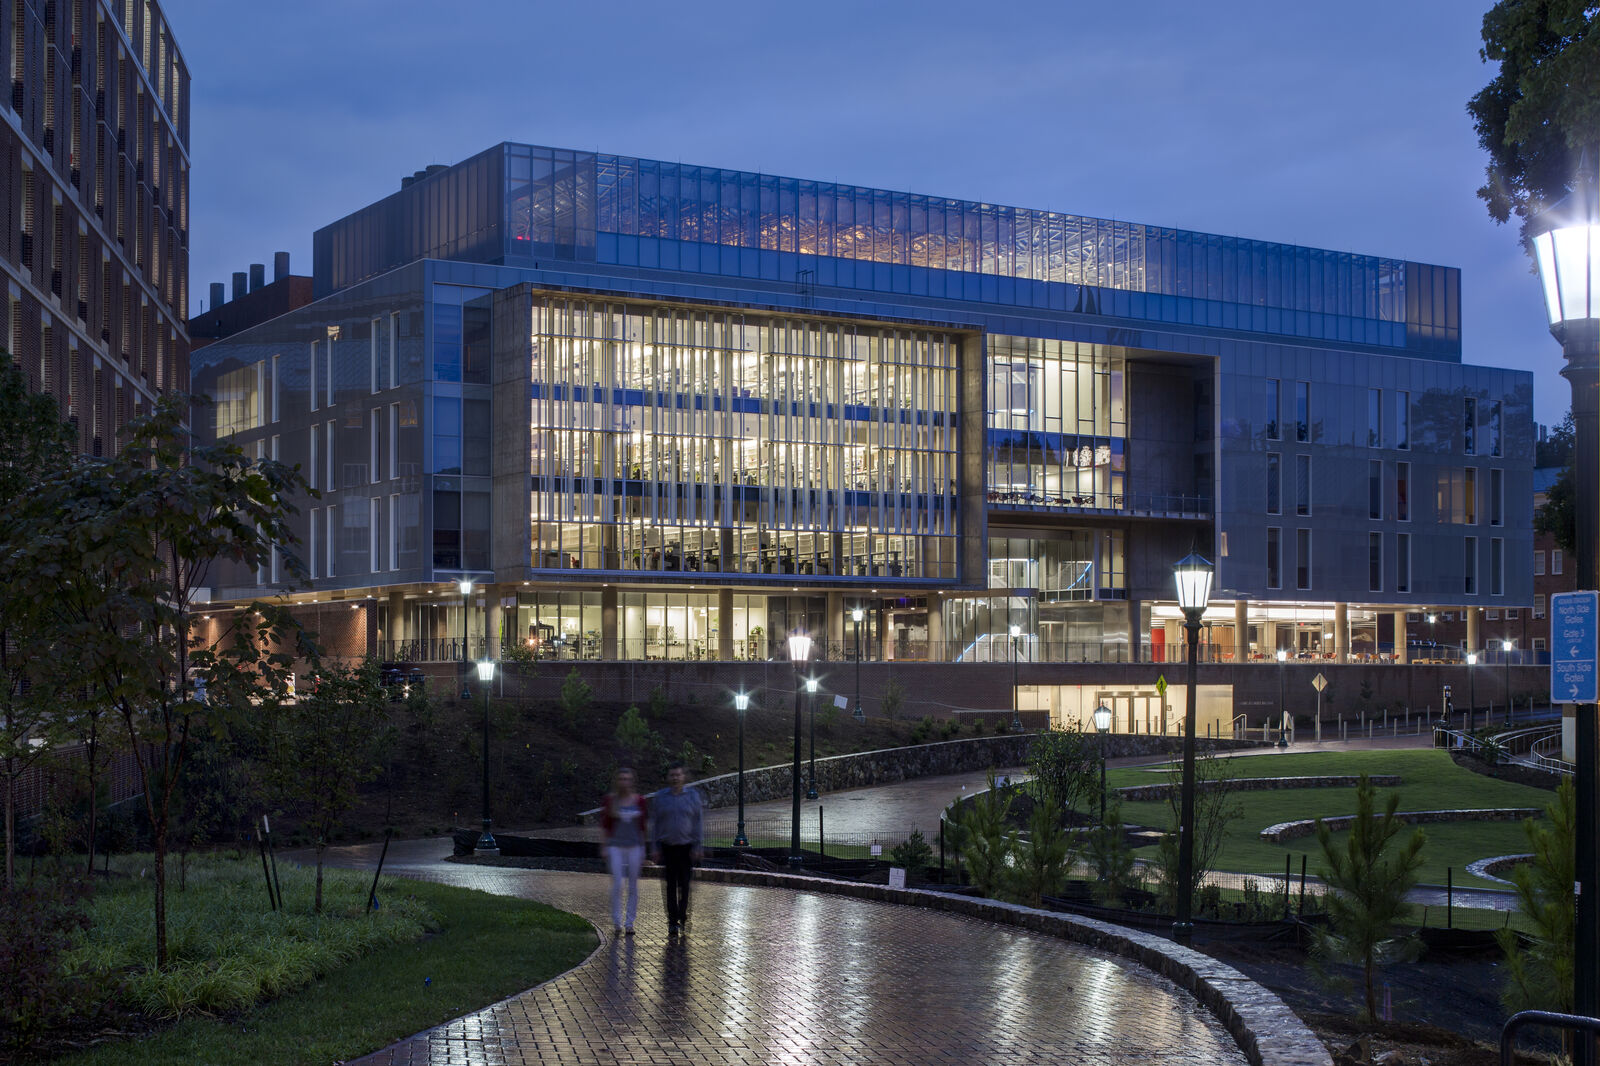 university-of-north-carolina-at-chapel-hill-genome-sciences-building-affiliated-engineers